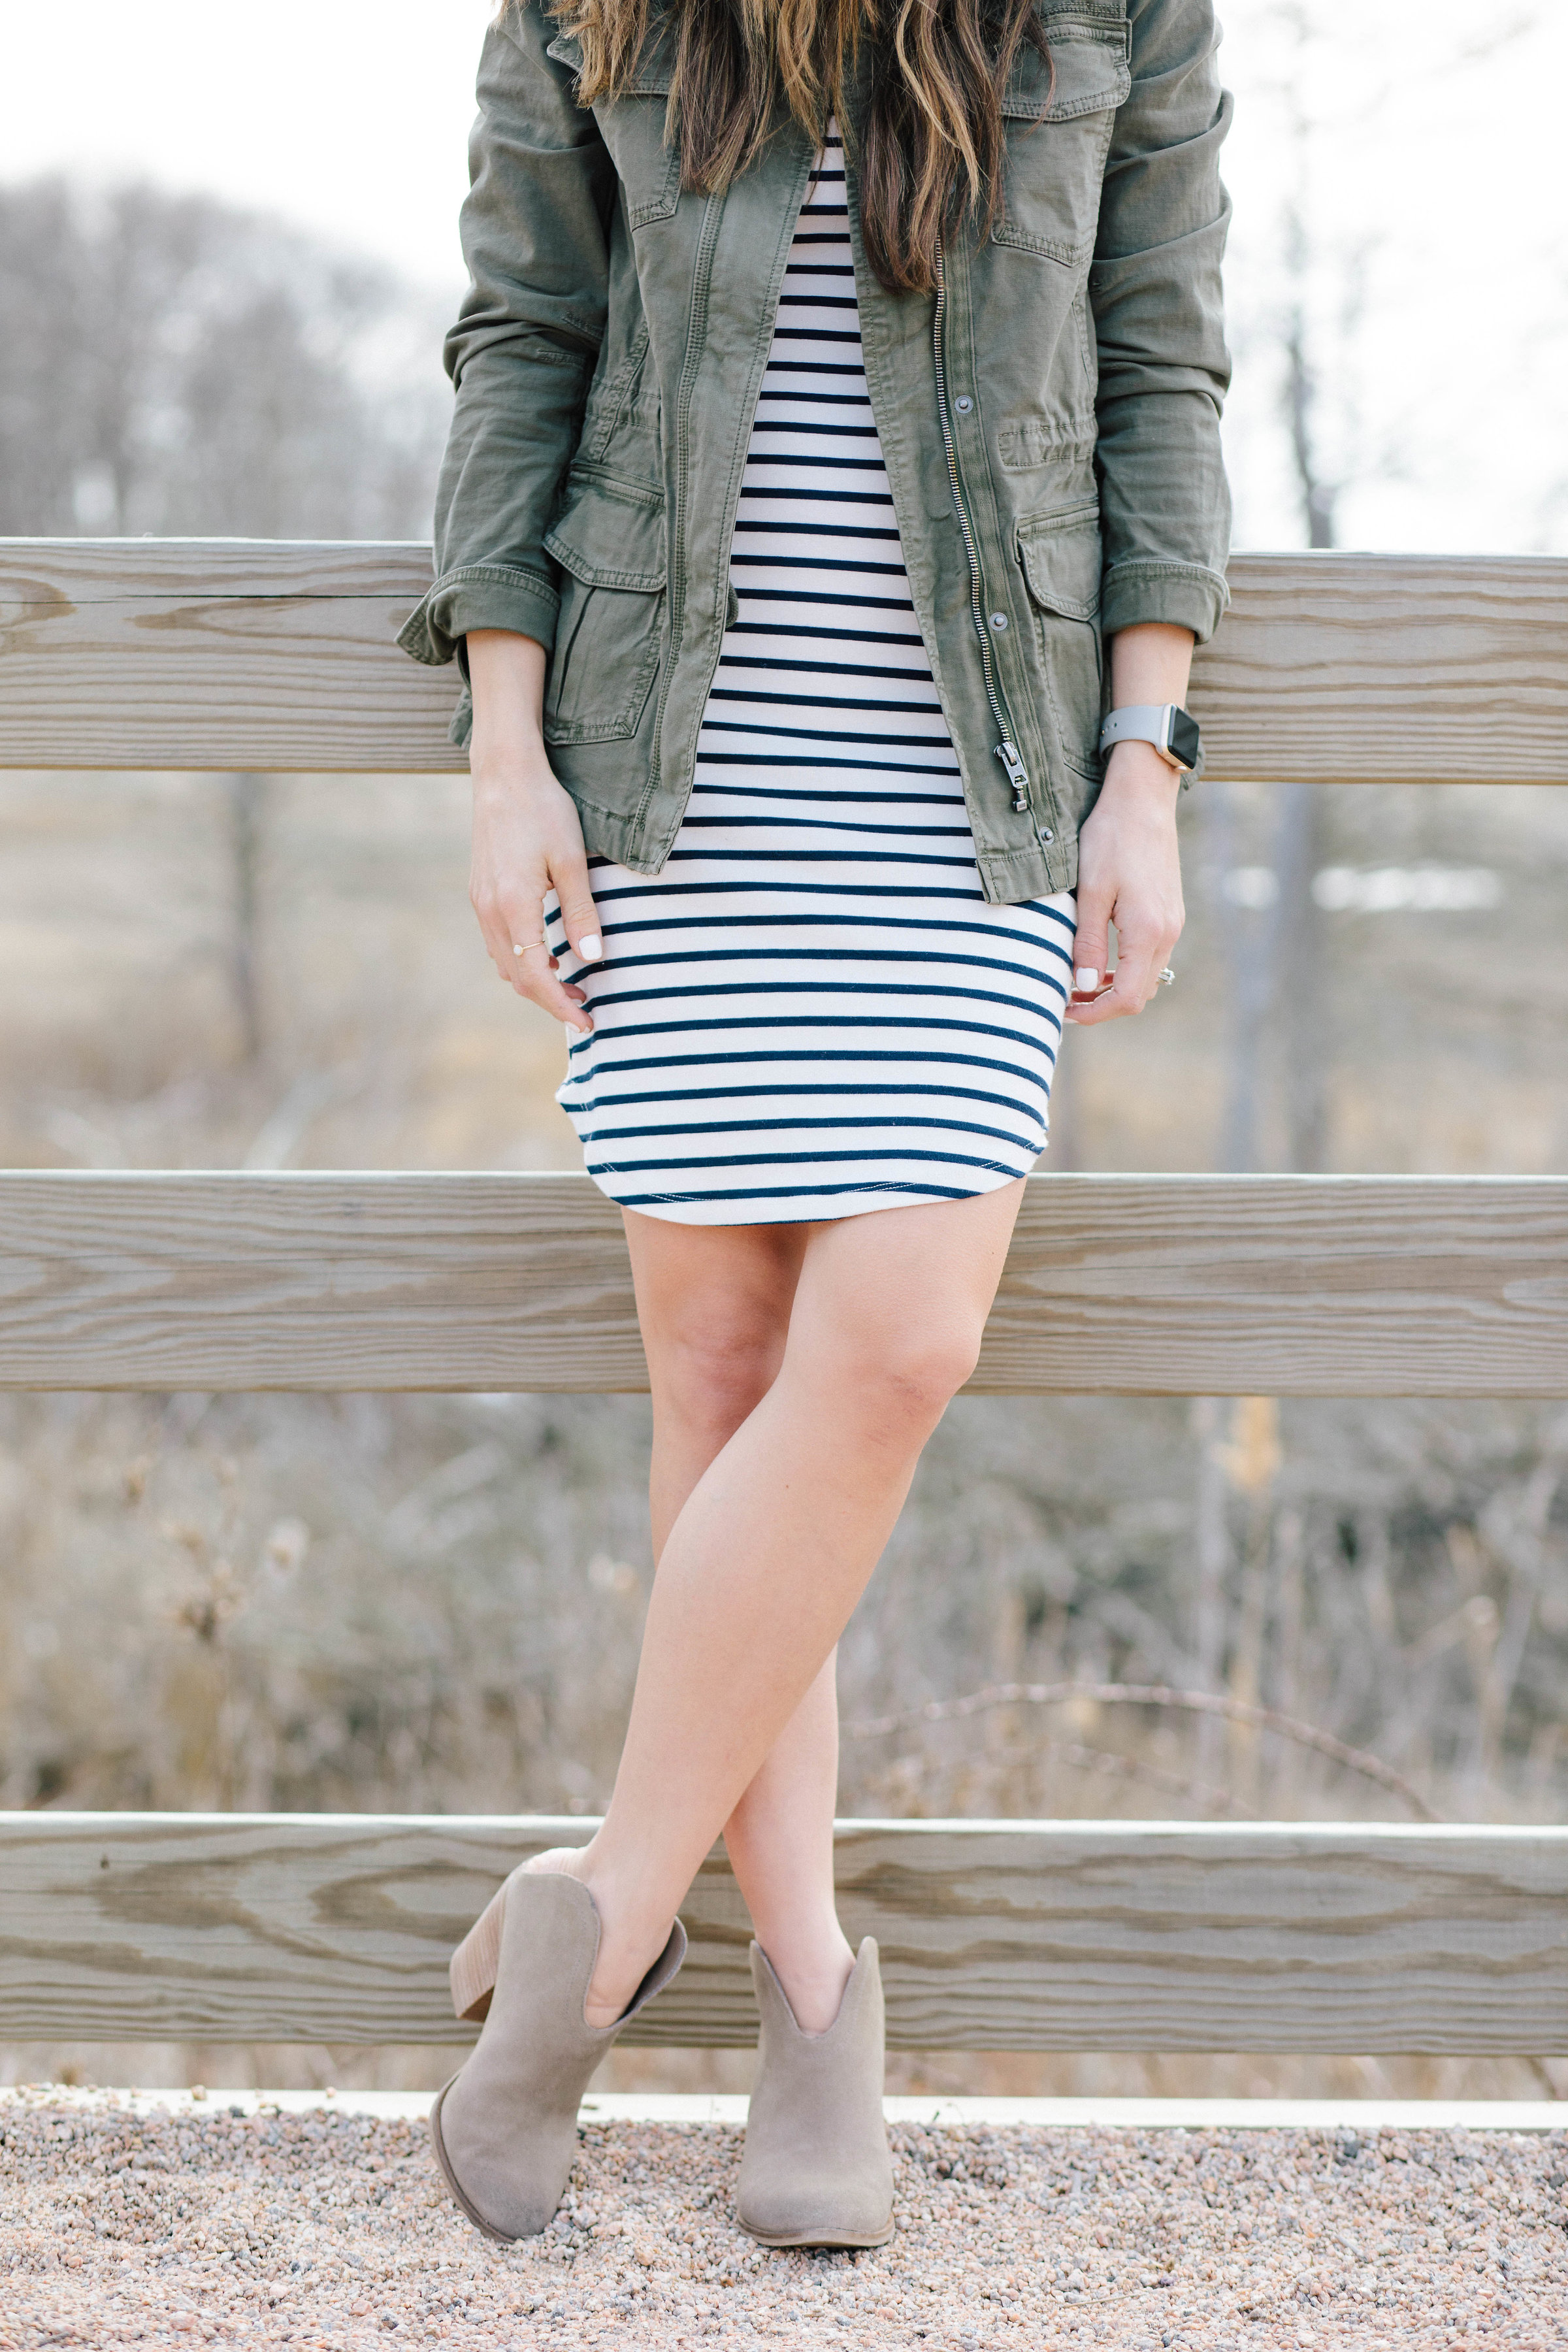 Need inspiration for how to style a striped dress? Adding a cargo jacket and booties is one of three ways in this post!